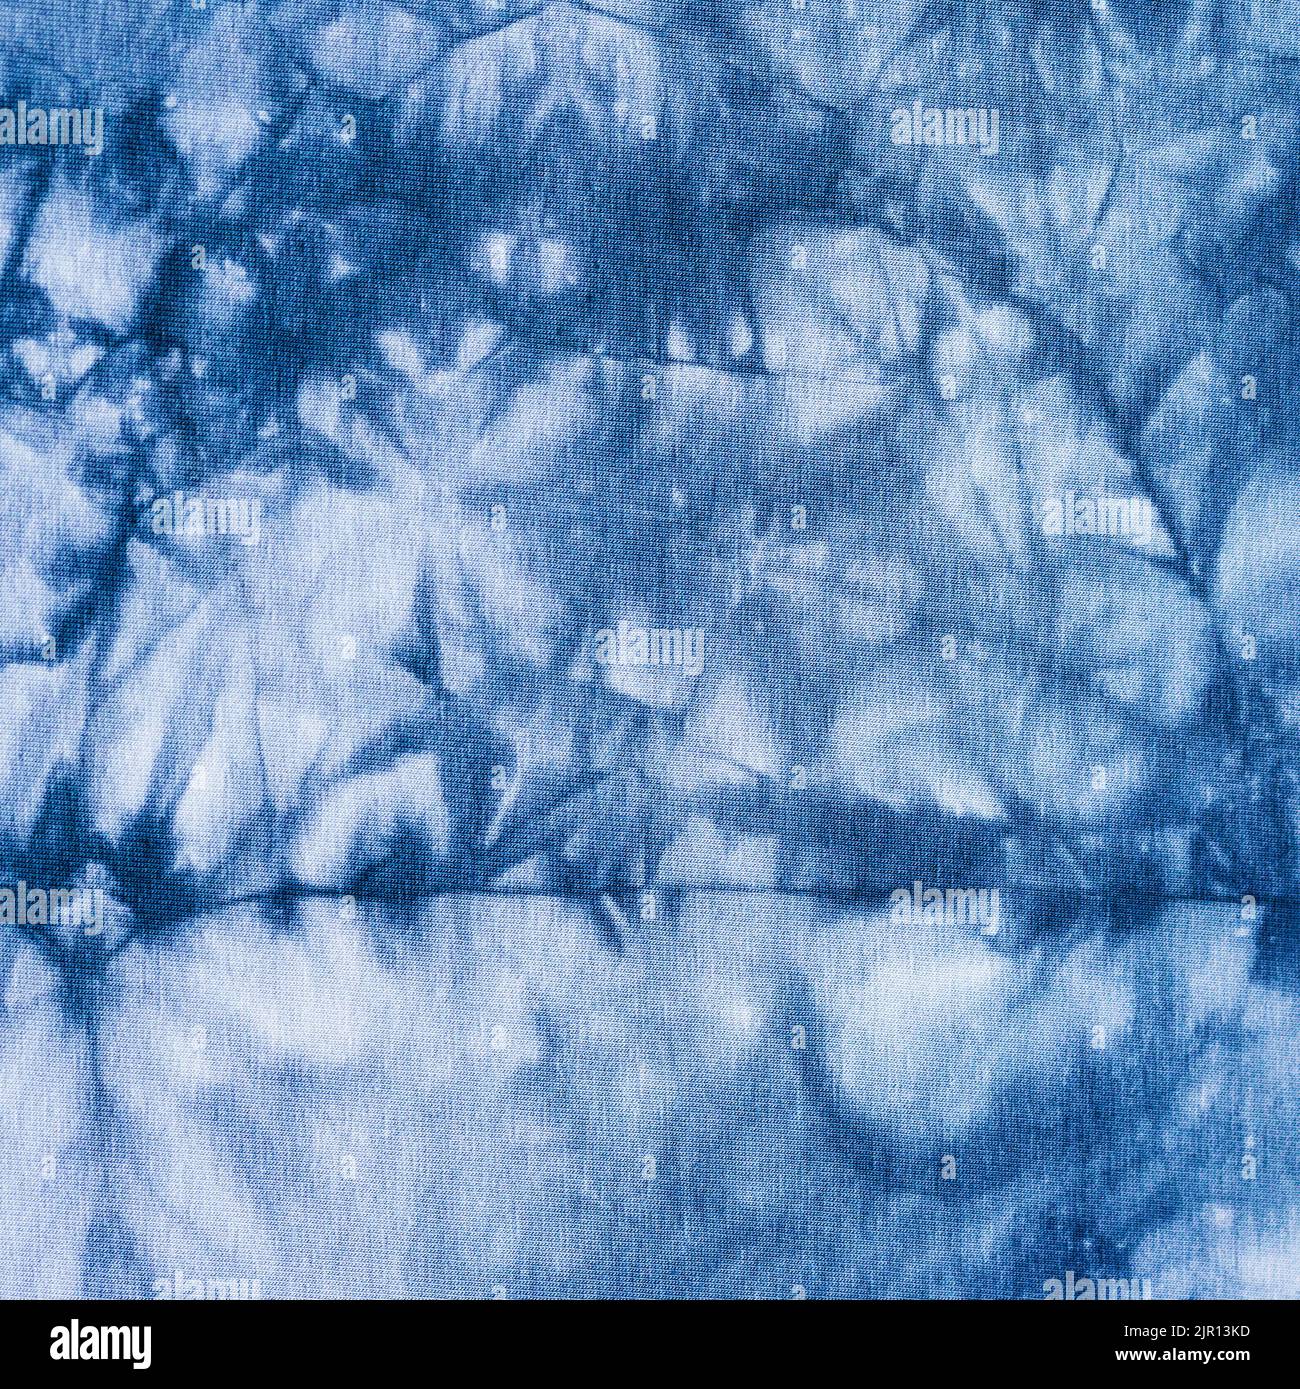 blue gray abstract pattern handcrafted in tie dye technique on cotton jersey fabric Stock Photo